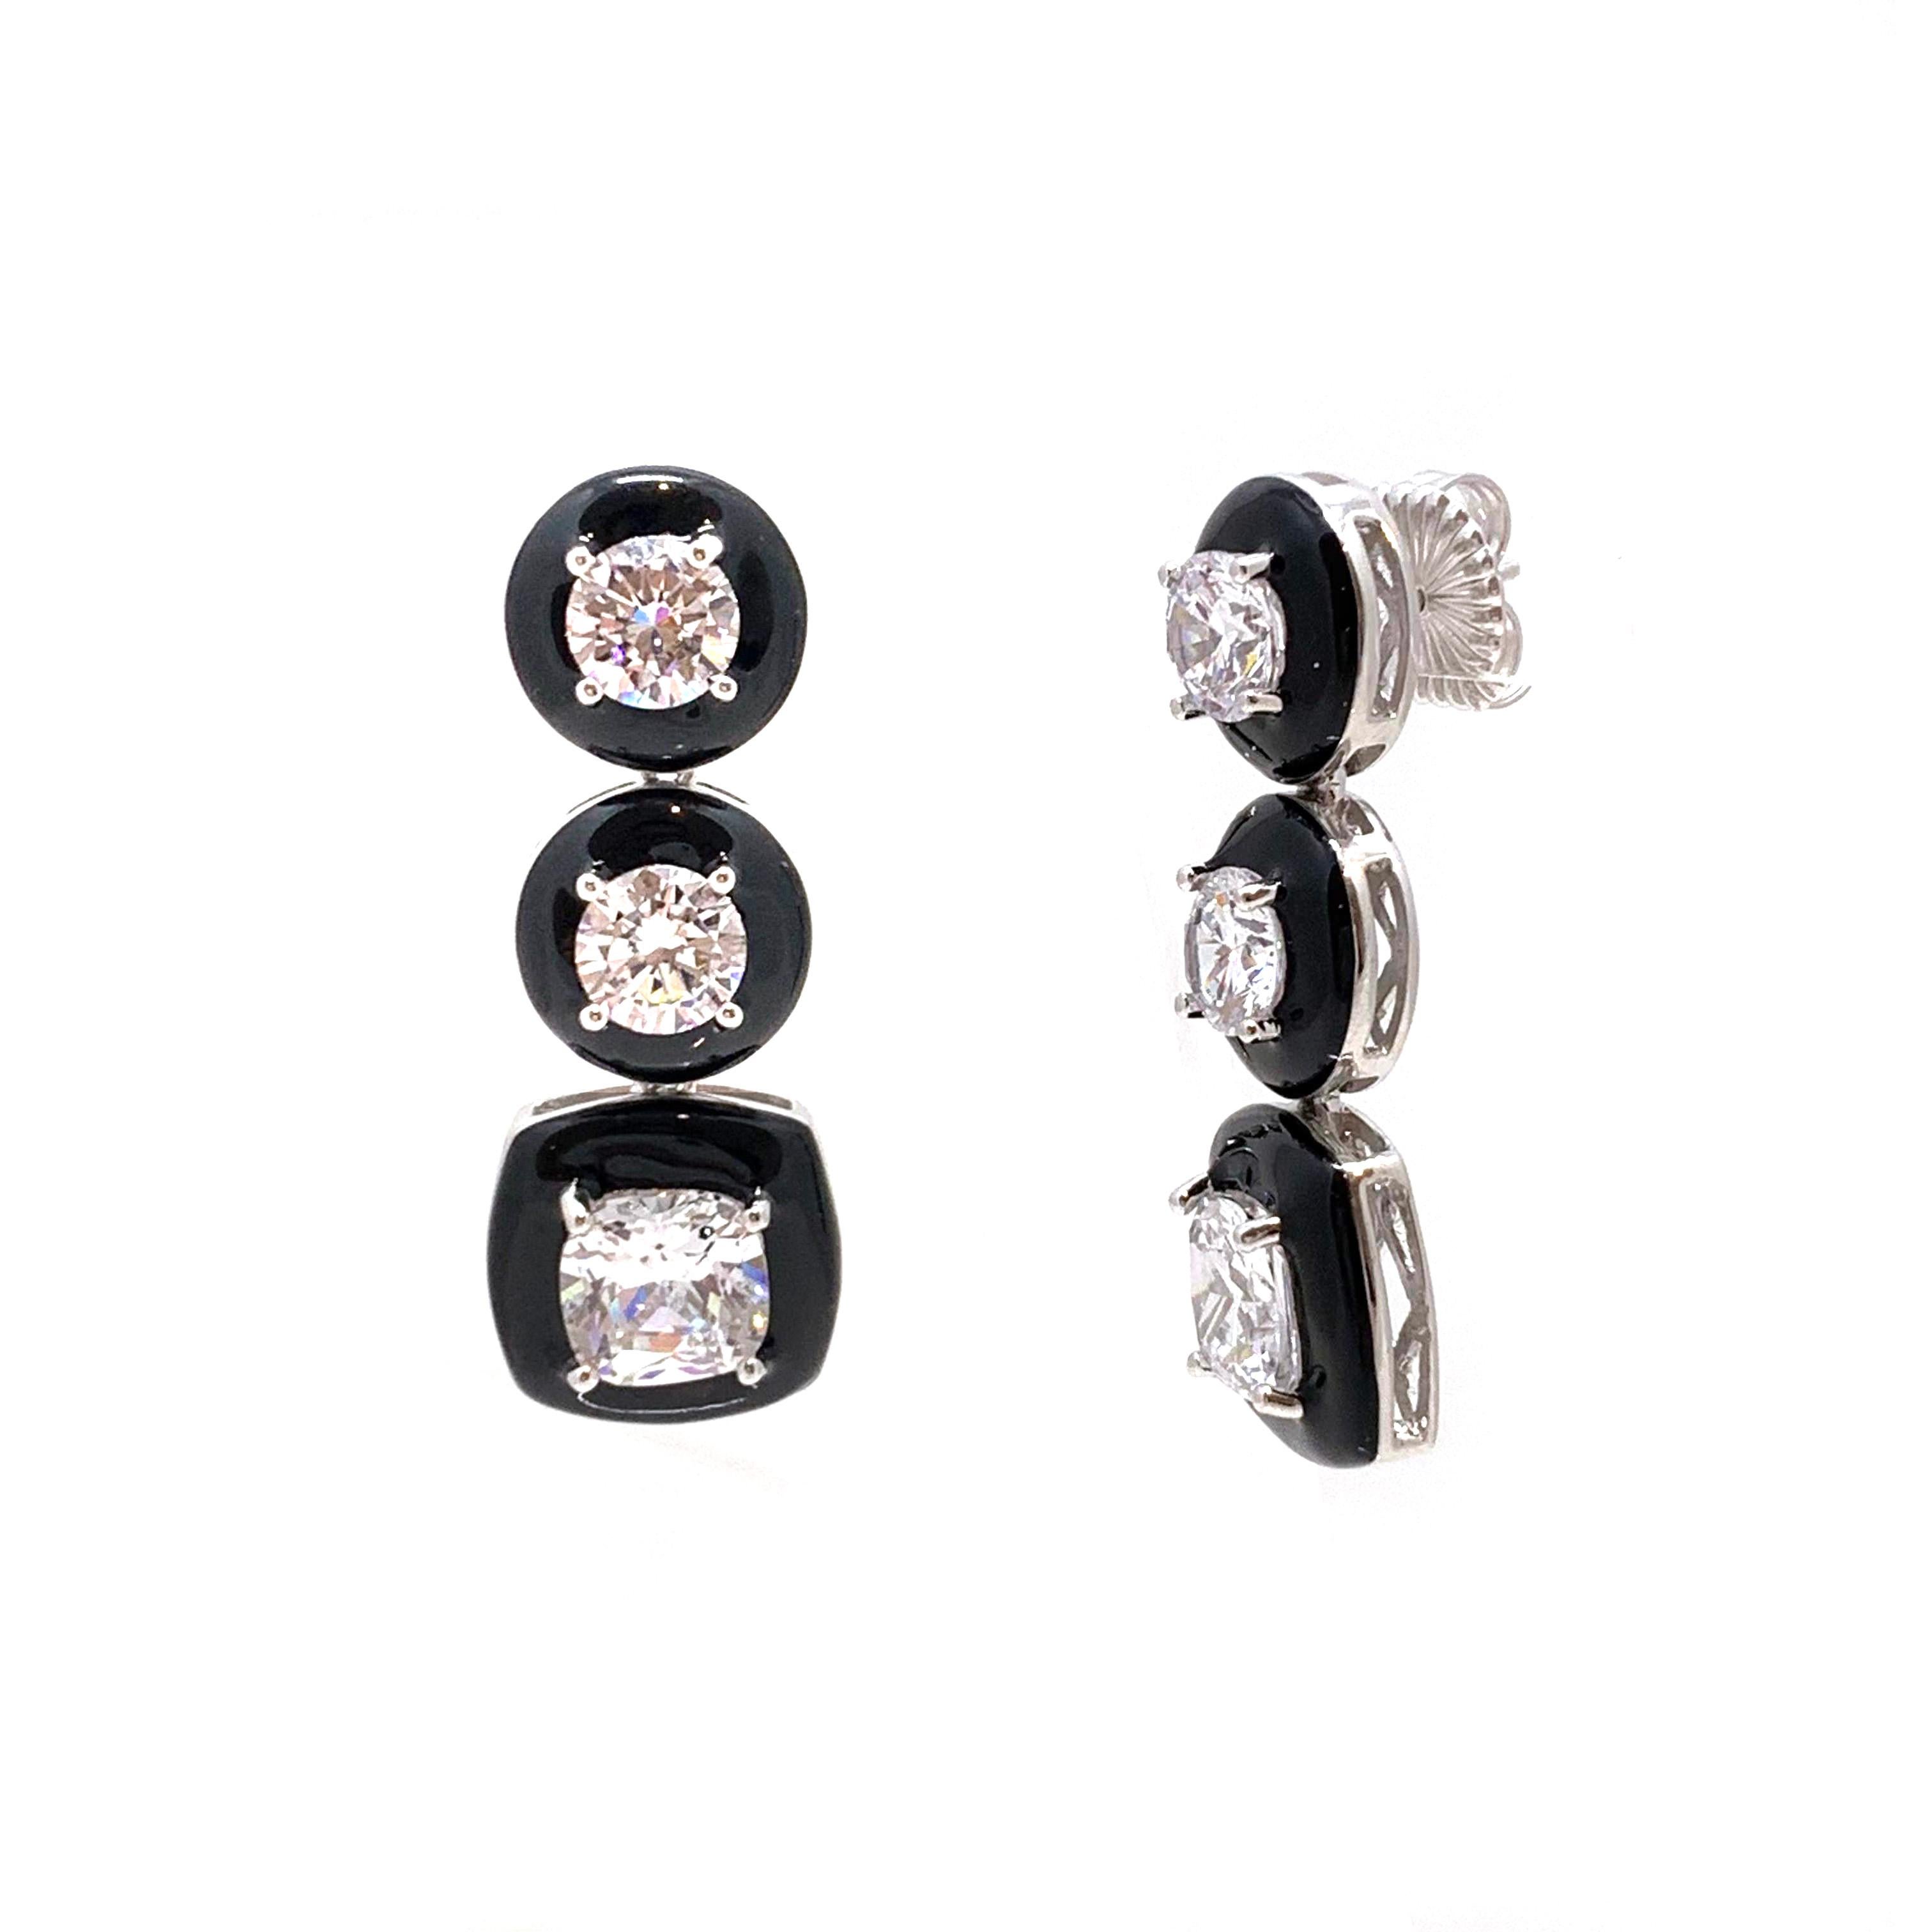 Elegant 3-Tier Black Enamel Simulated Diamond Dangle Sterling Silver Earrings

These modern-style earrings feature round and cushion-cut simulated diamond cz (5ct total each side) handset in platinum rhodium plated sterling silver and layered over